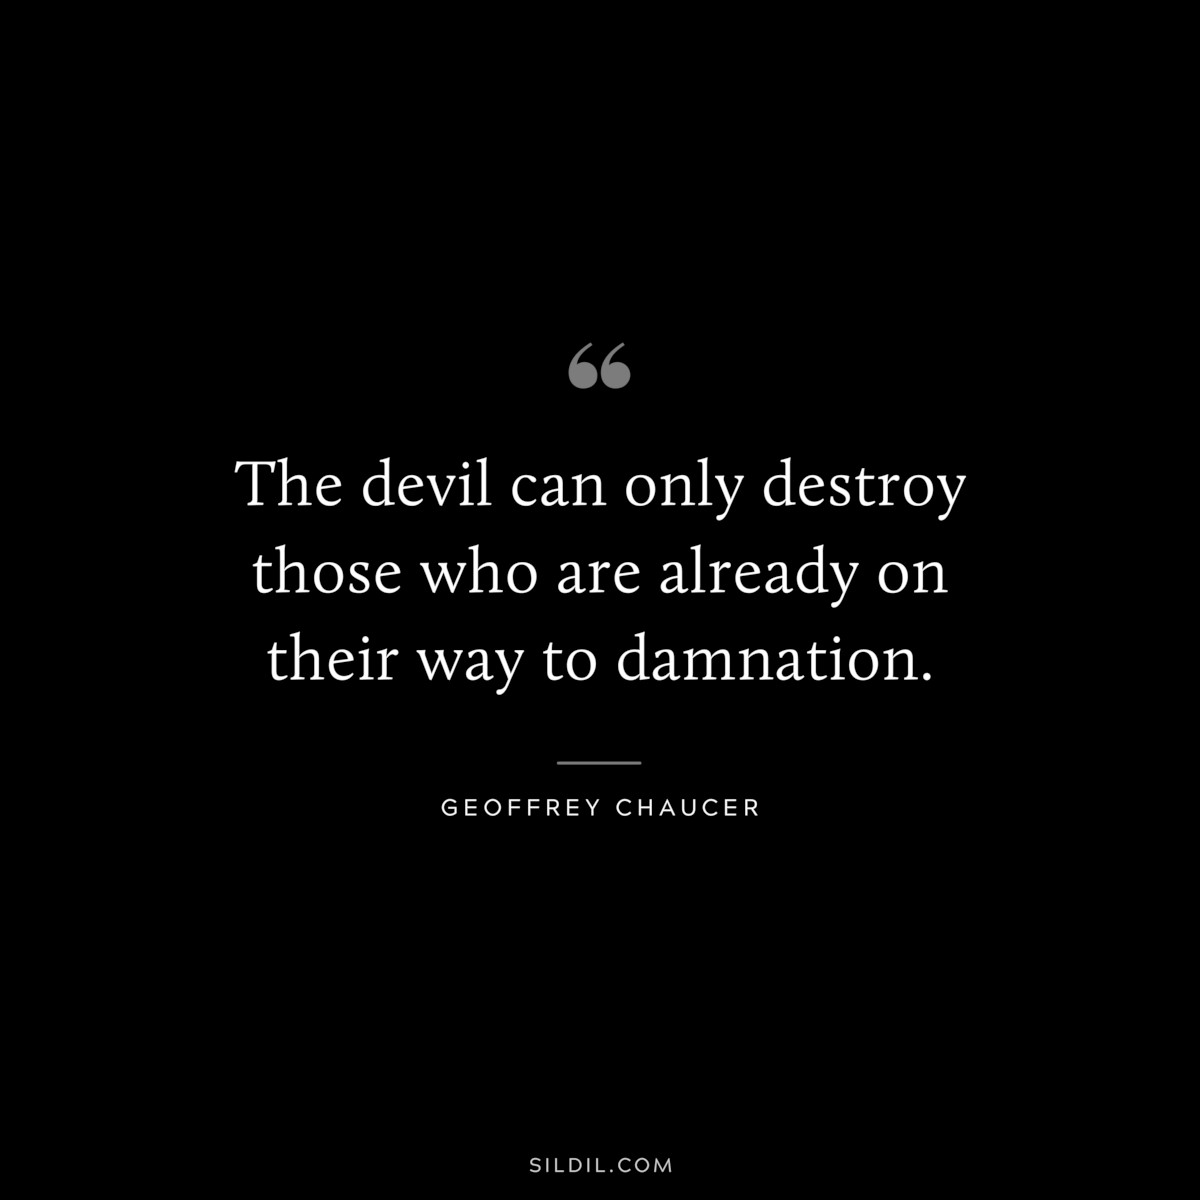 The devil can only destroy those who are already on their way to damnation. ― Geoffrey Chaucer